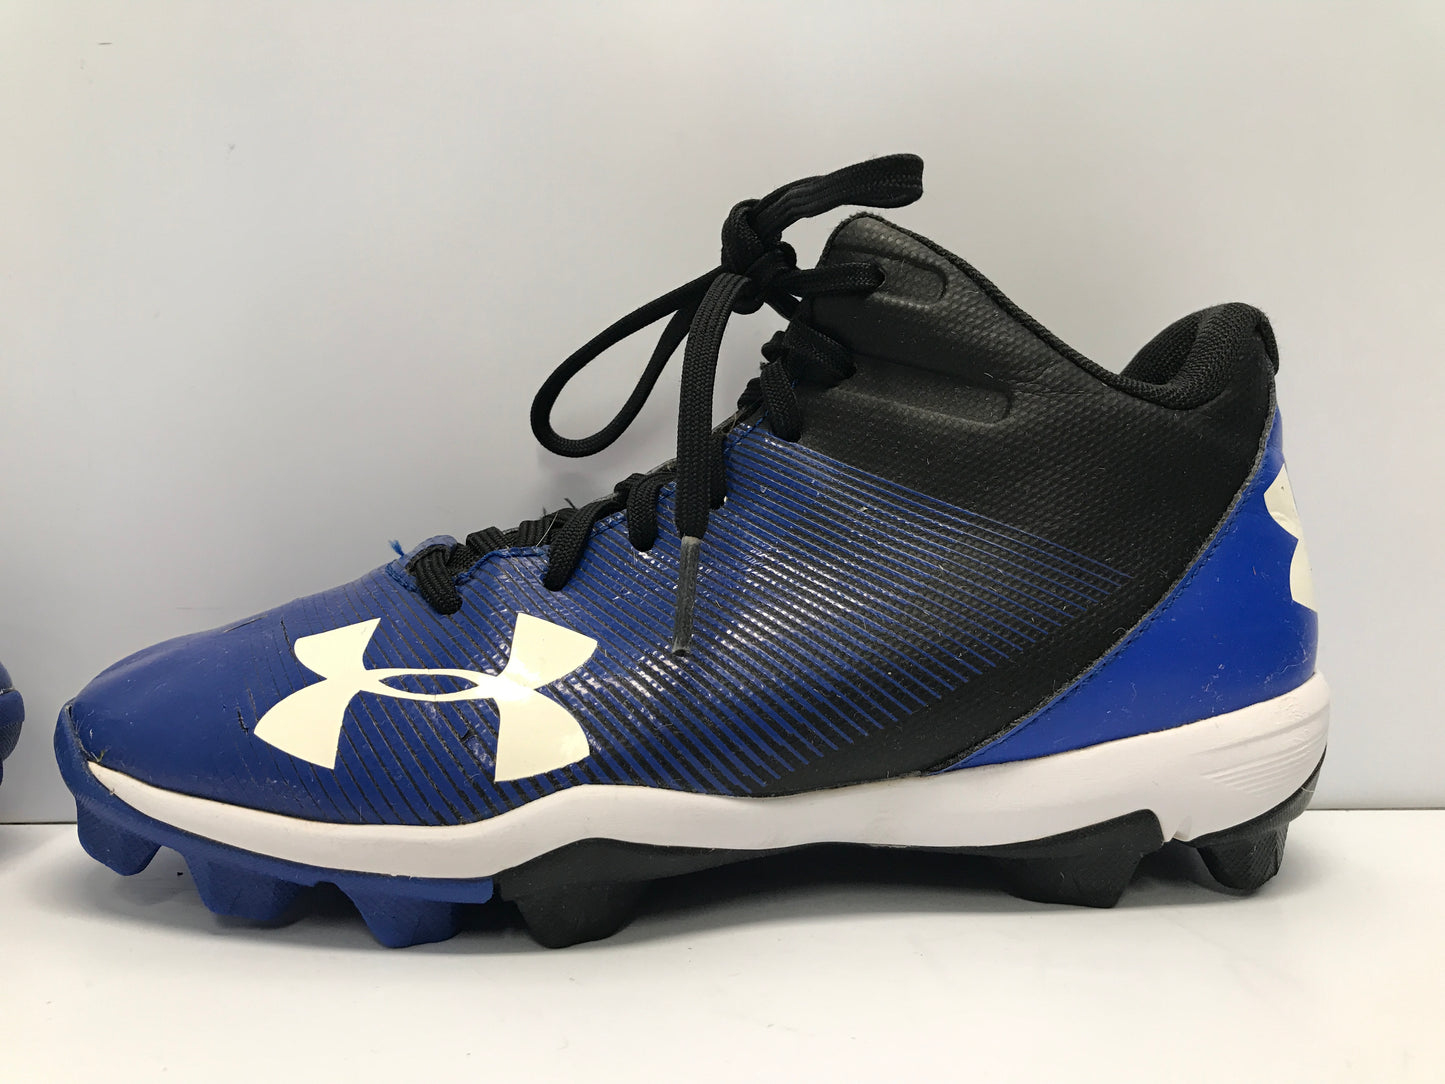 Baseball Shoes Cleats Child Size 5 Youth Under Armour High Top Blue Black Excellent